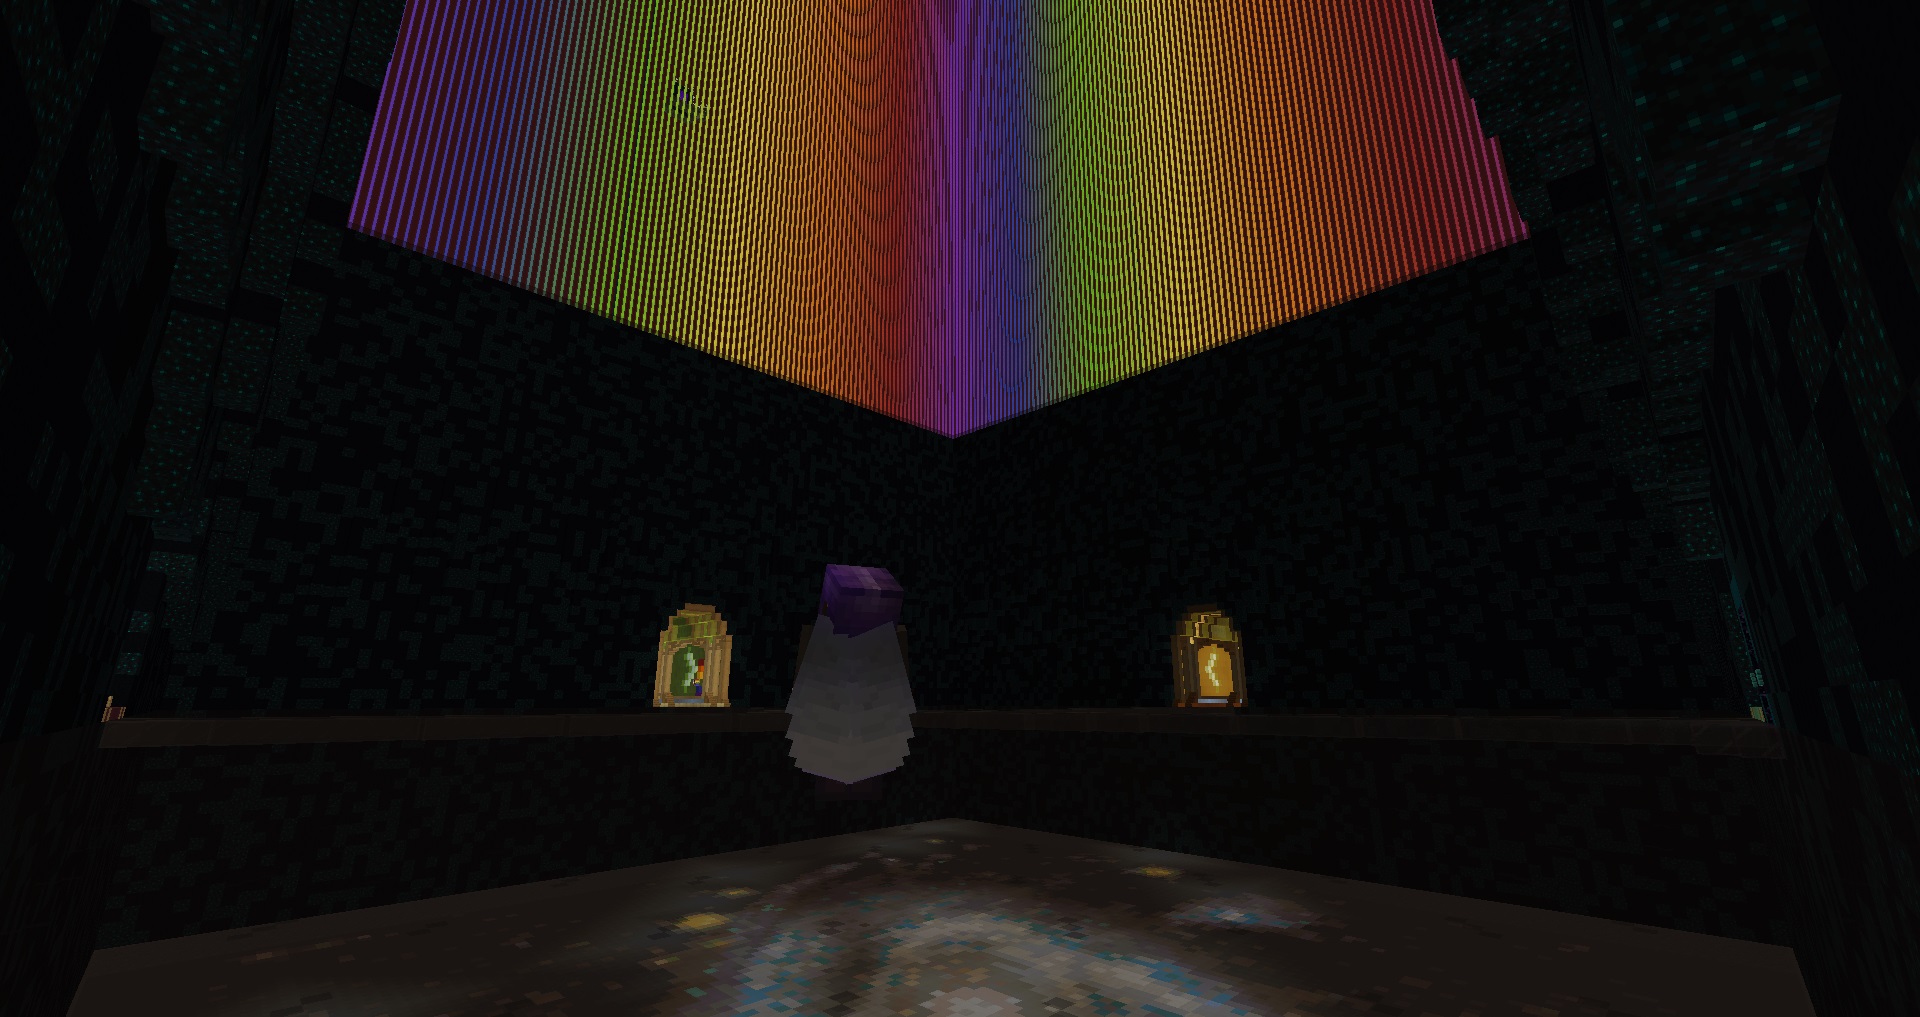 A screenshot of Minecraft, a ground level view of the nether hub with 408 beacons creating a rainbow effect. Kindalas stands with his back to the camera.